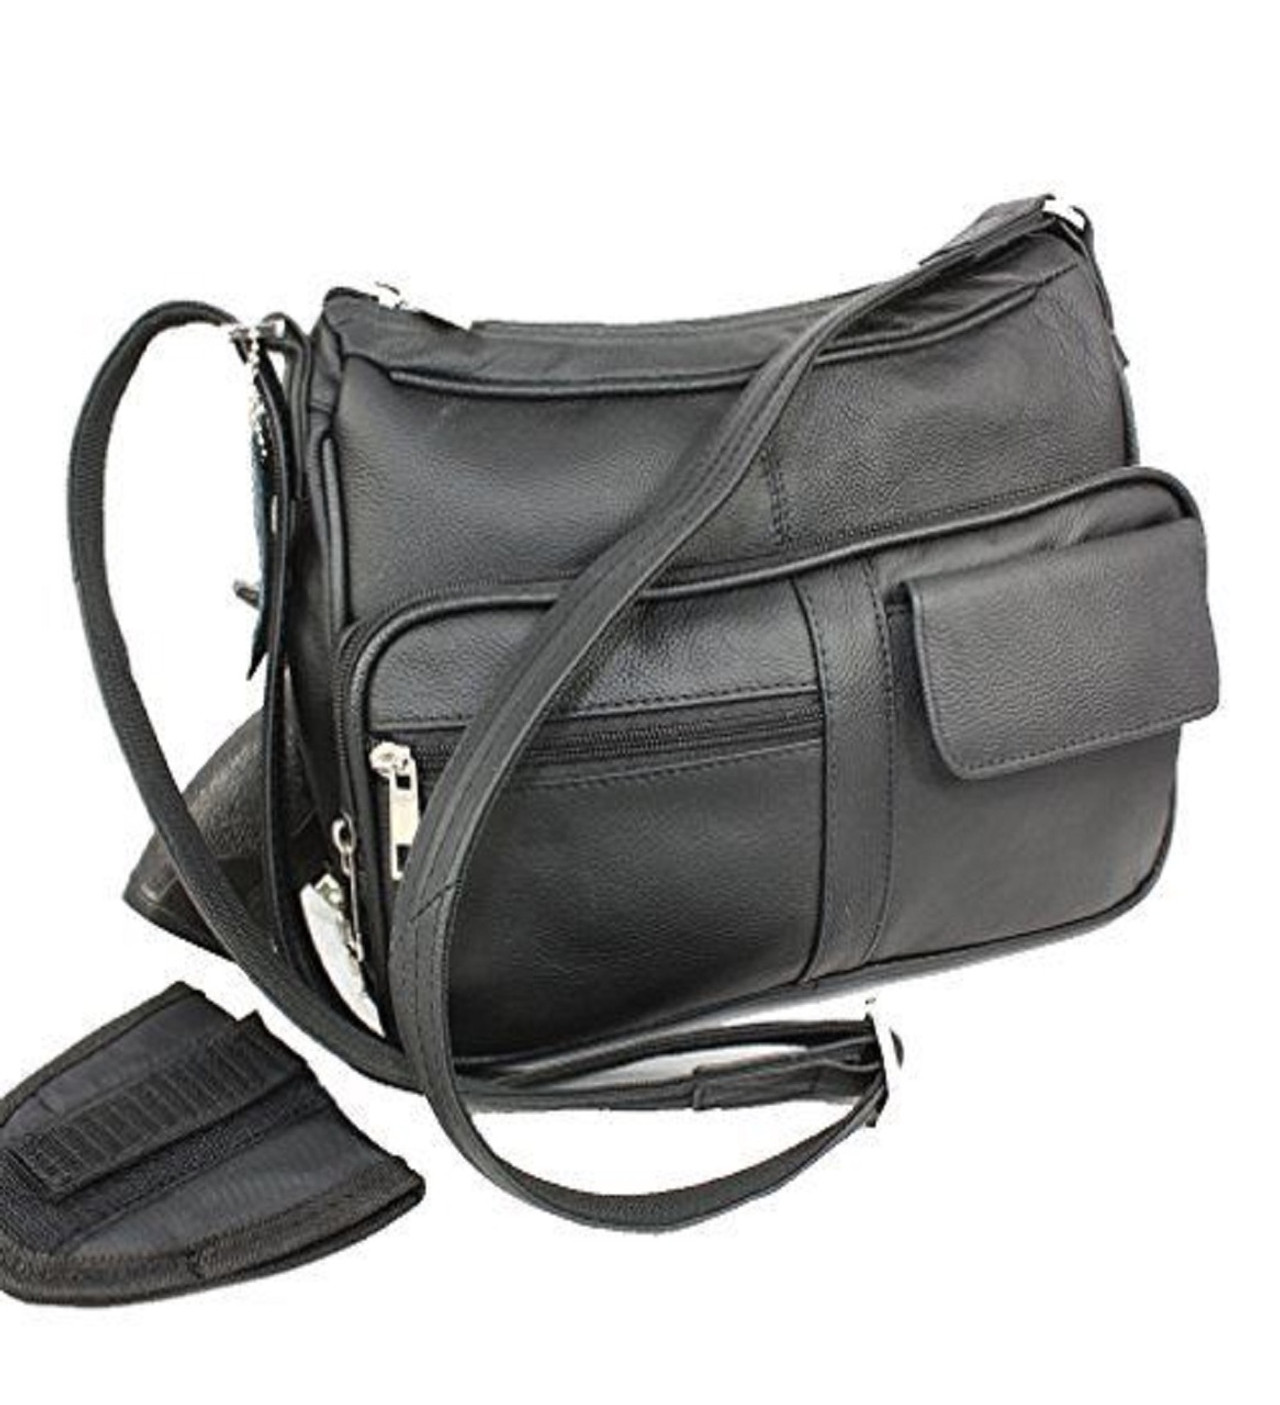 Concealed Carry Purse - Genuine Leather Locking CCW Gun Bag - Left and ...